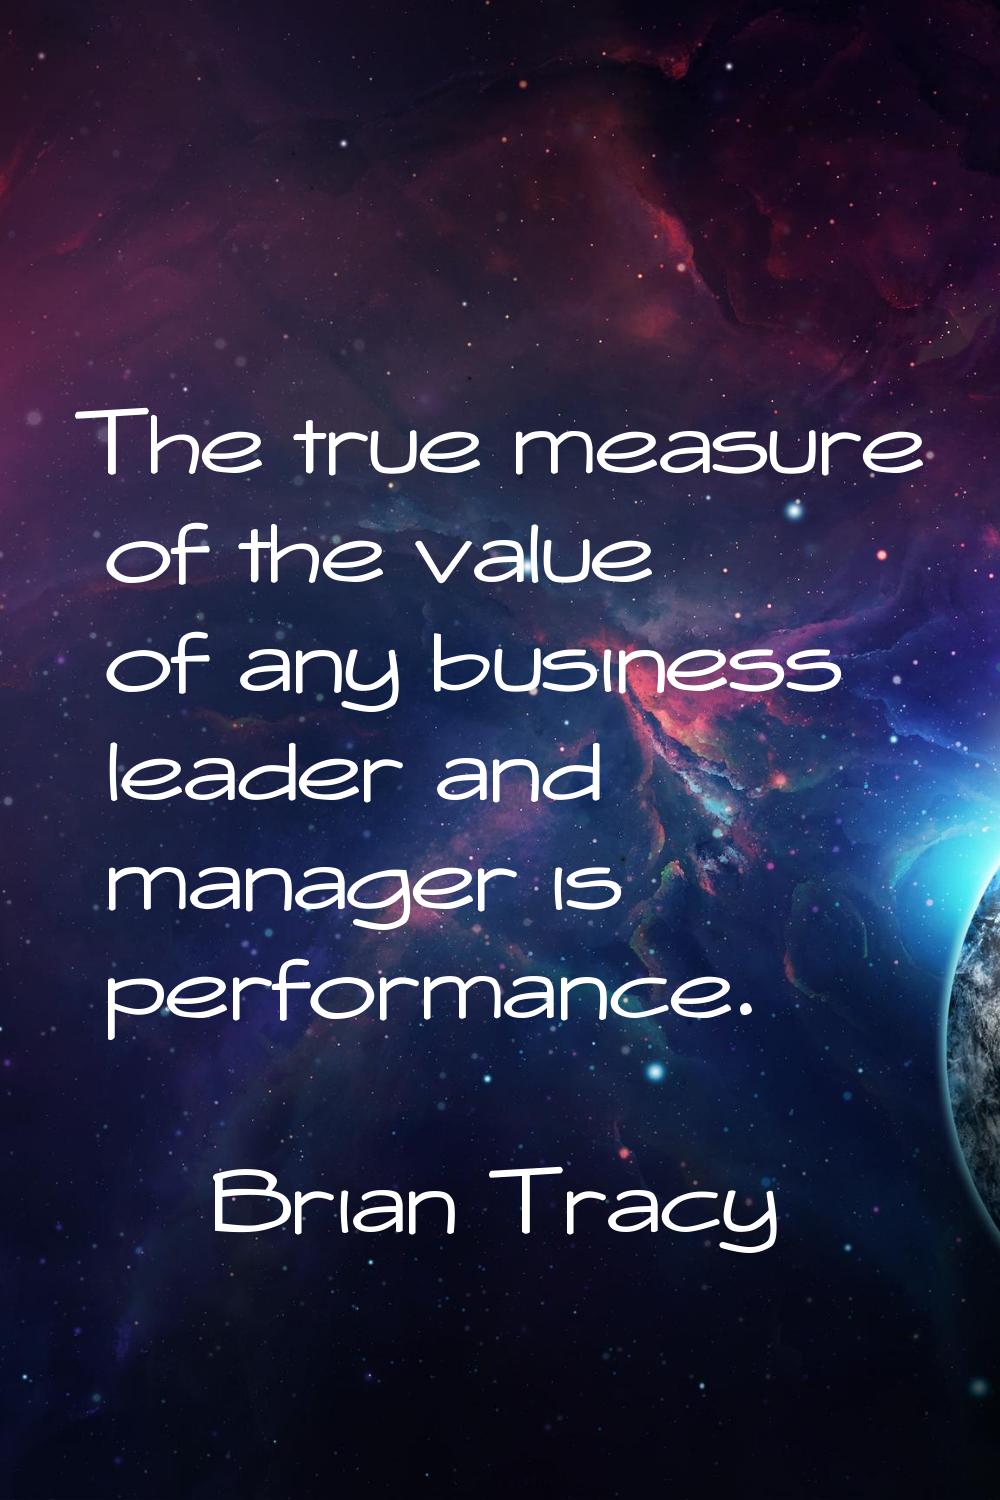 The true measure of the value of any business leader and manager is performance.